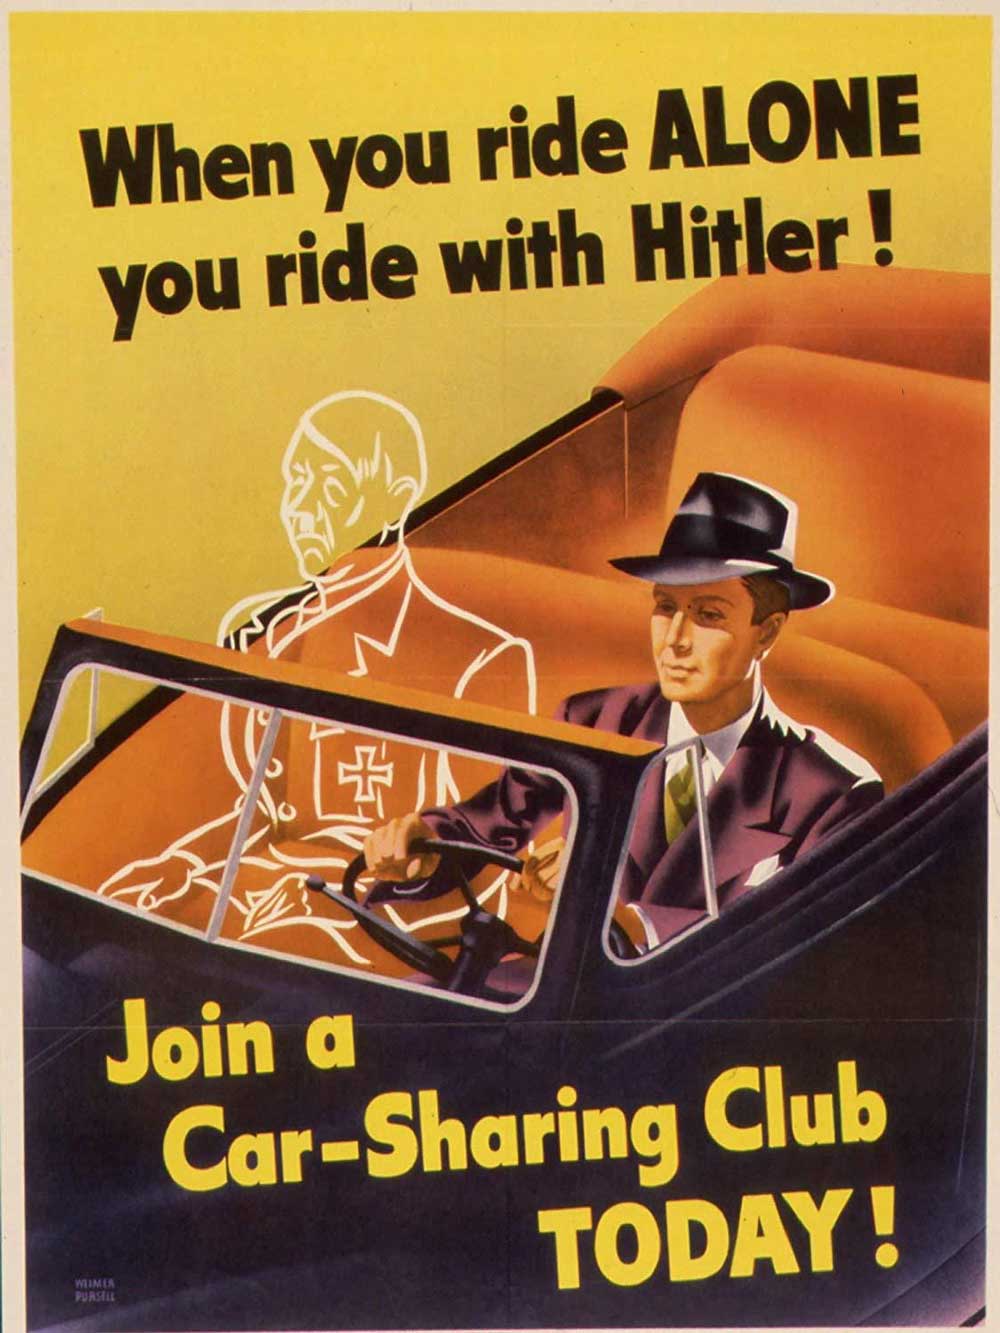 Posters promoted car-sharing